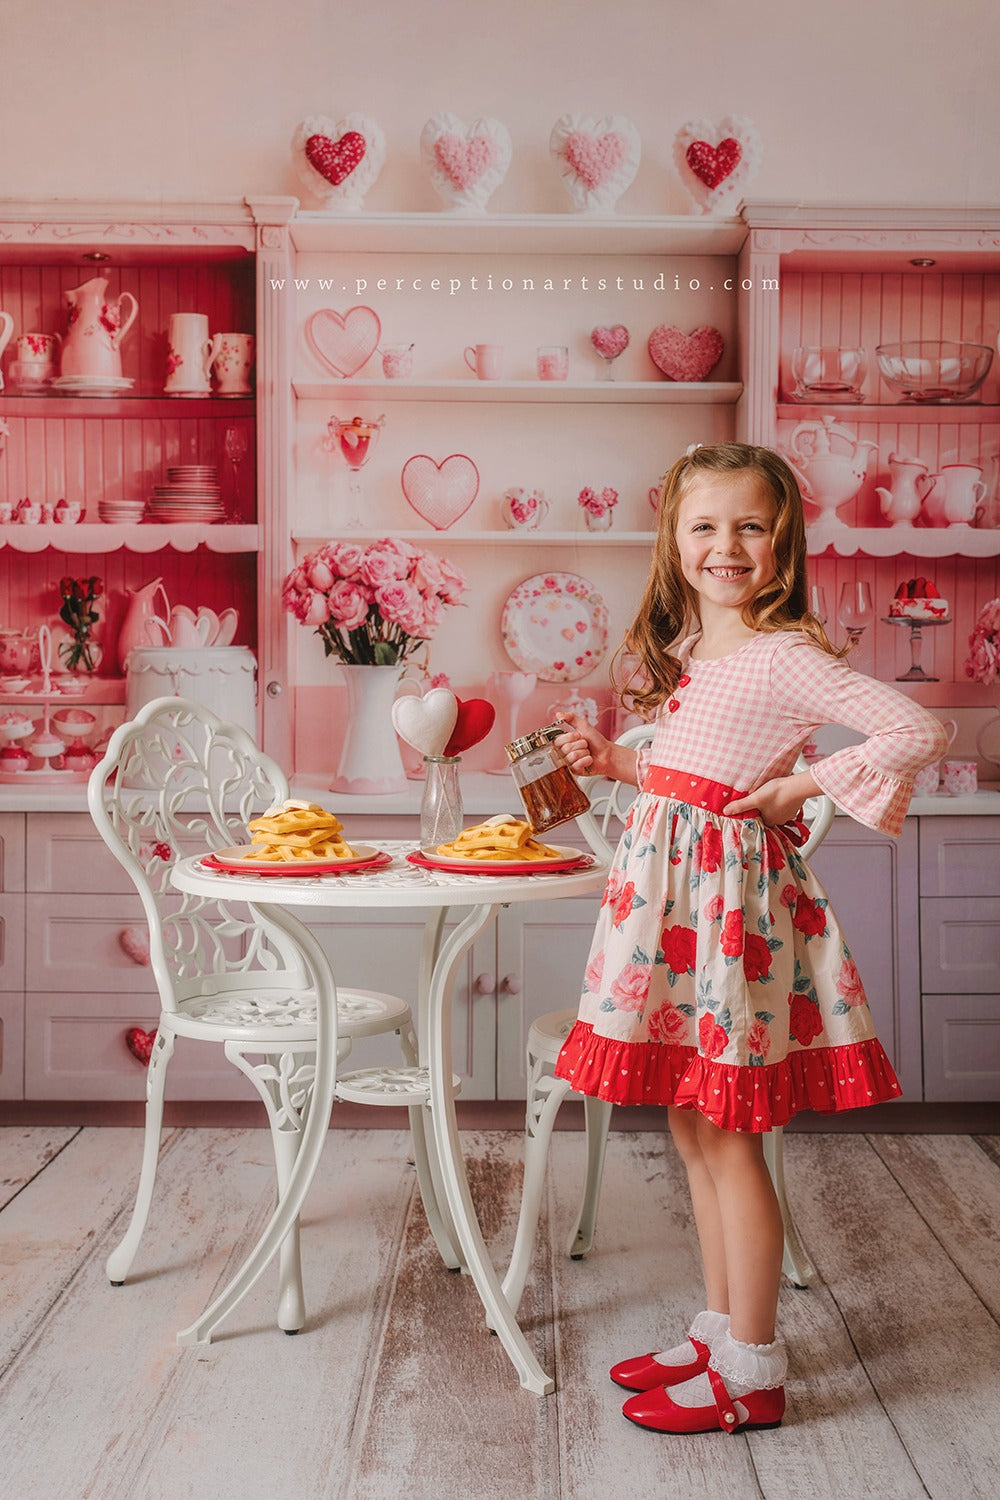 Kate Valentine's Day Pink Sweet Kitchen Backdrop Designed by Emetselch